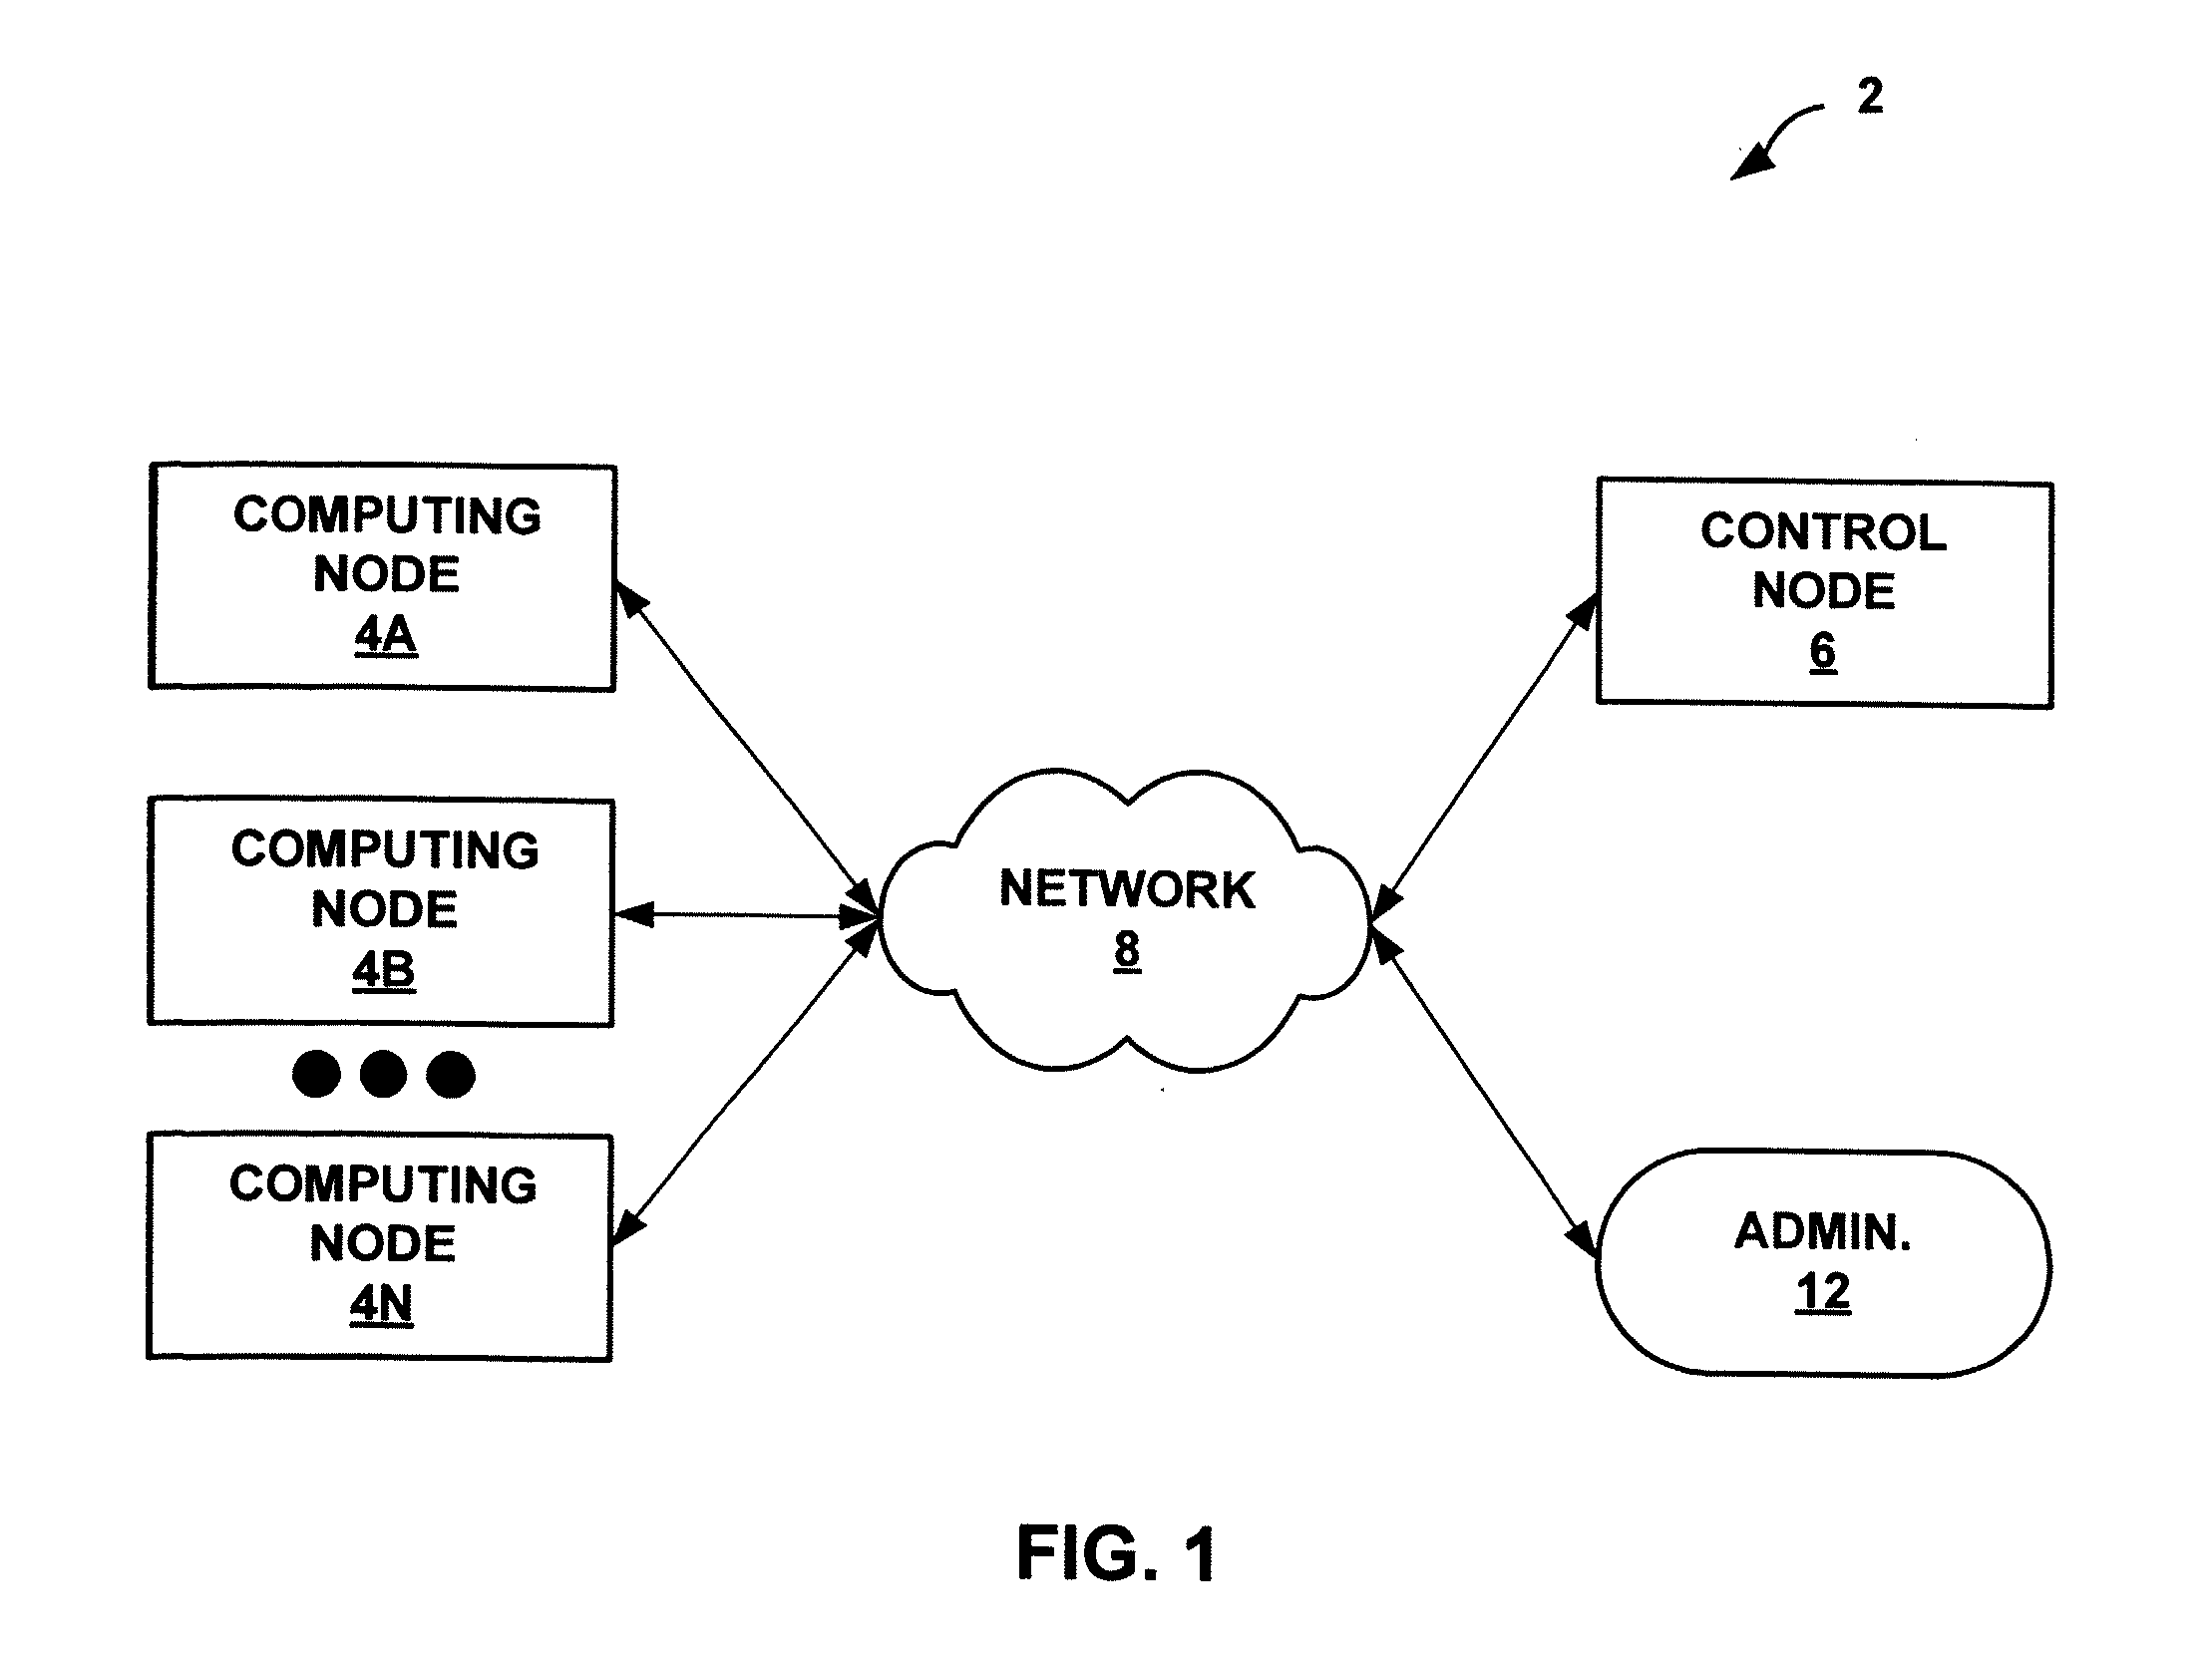 Autonomic Control of a Distributed Computing System Using Finite State Machines